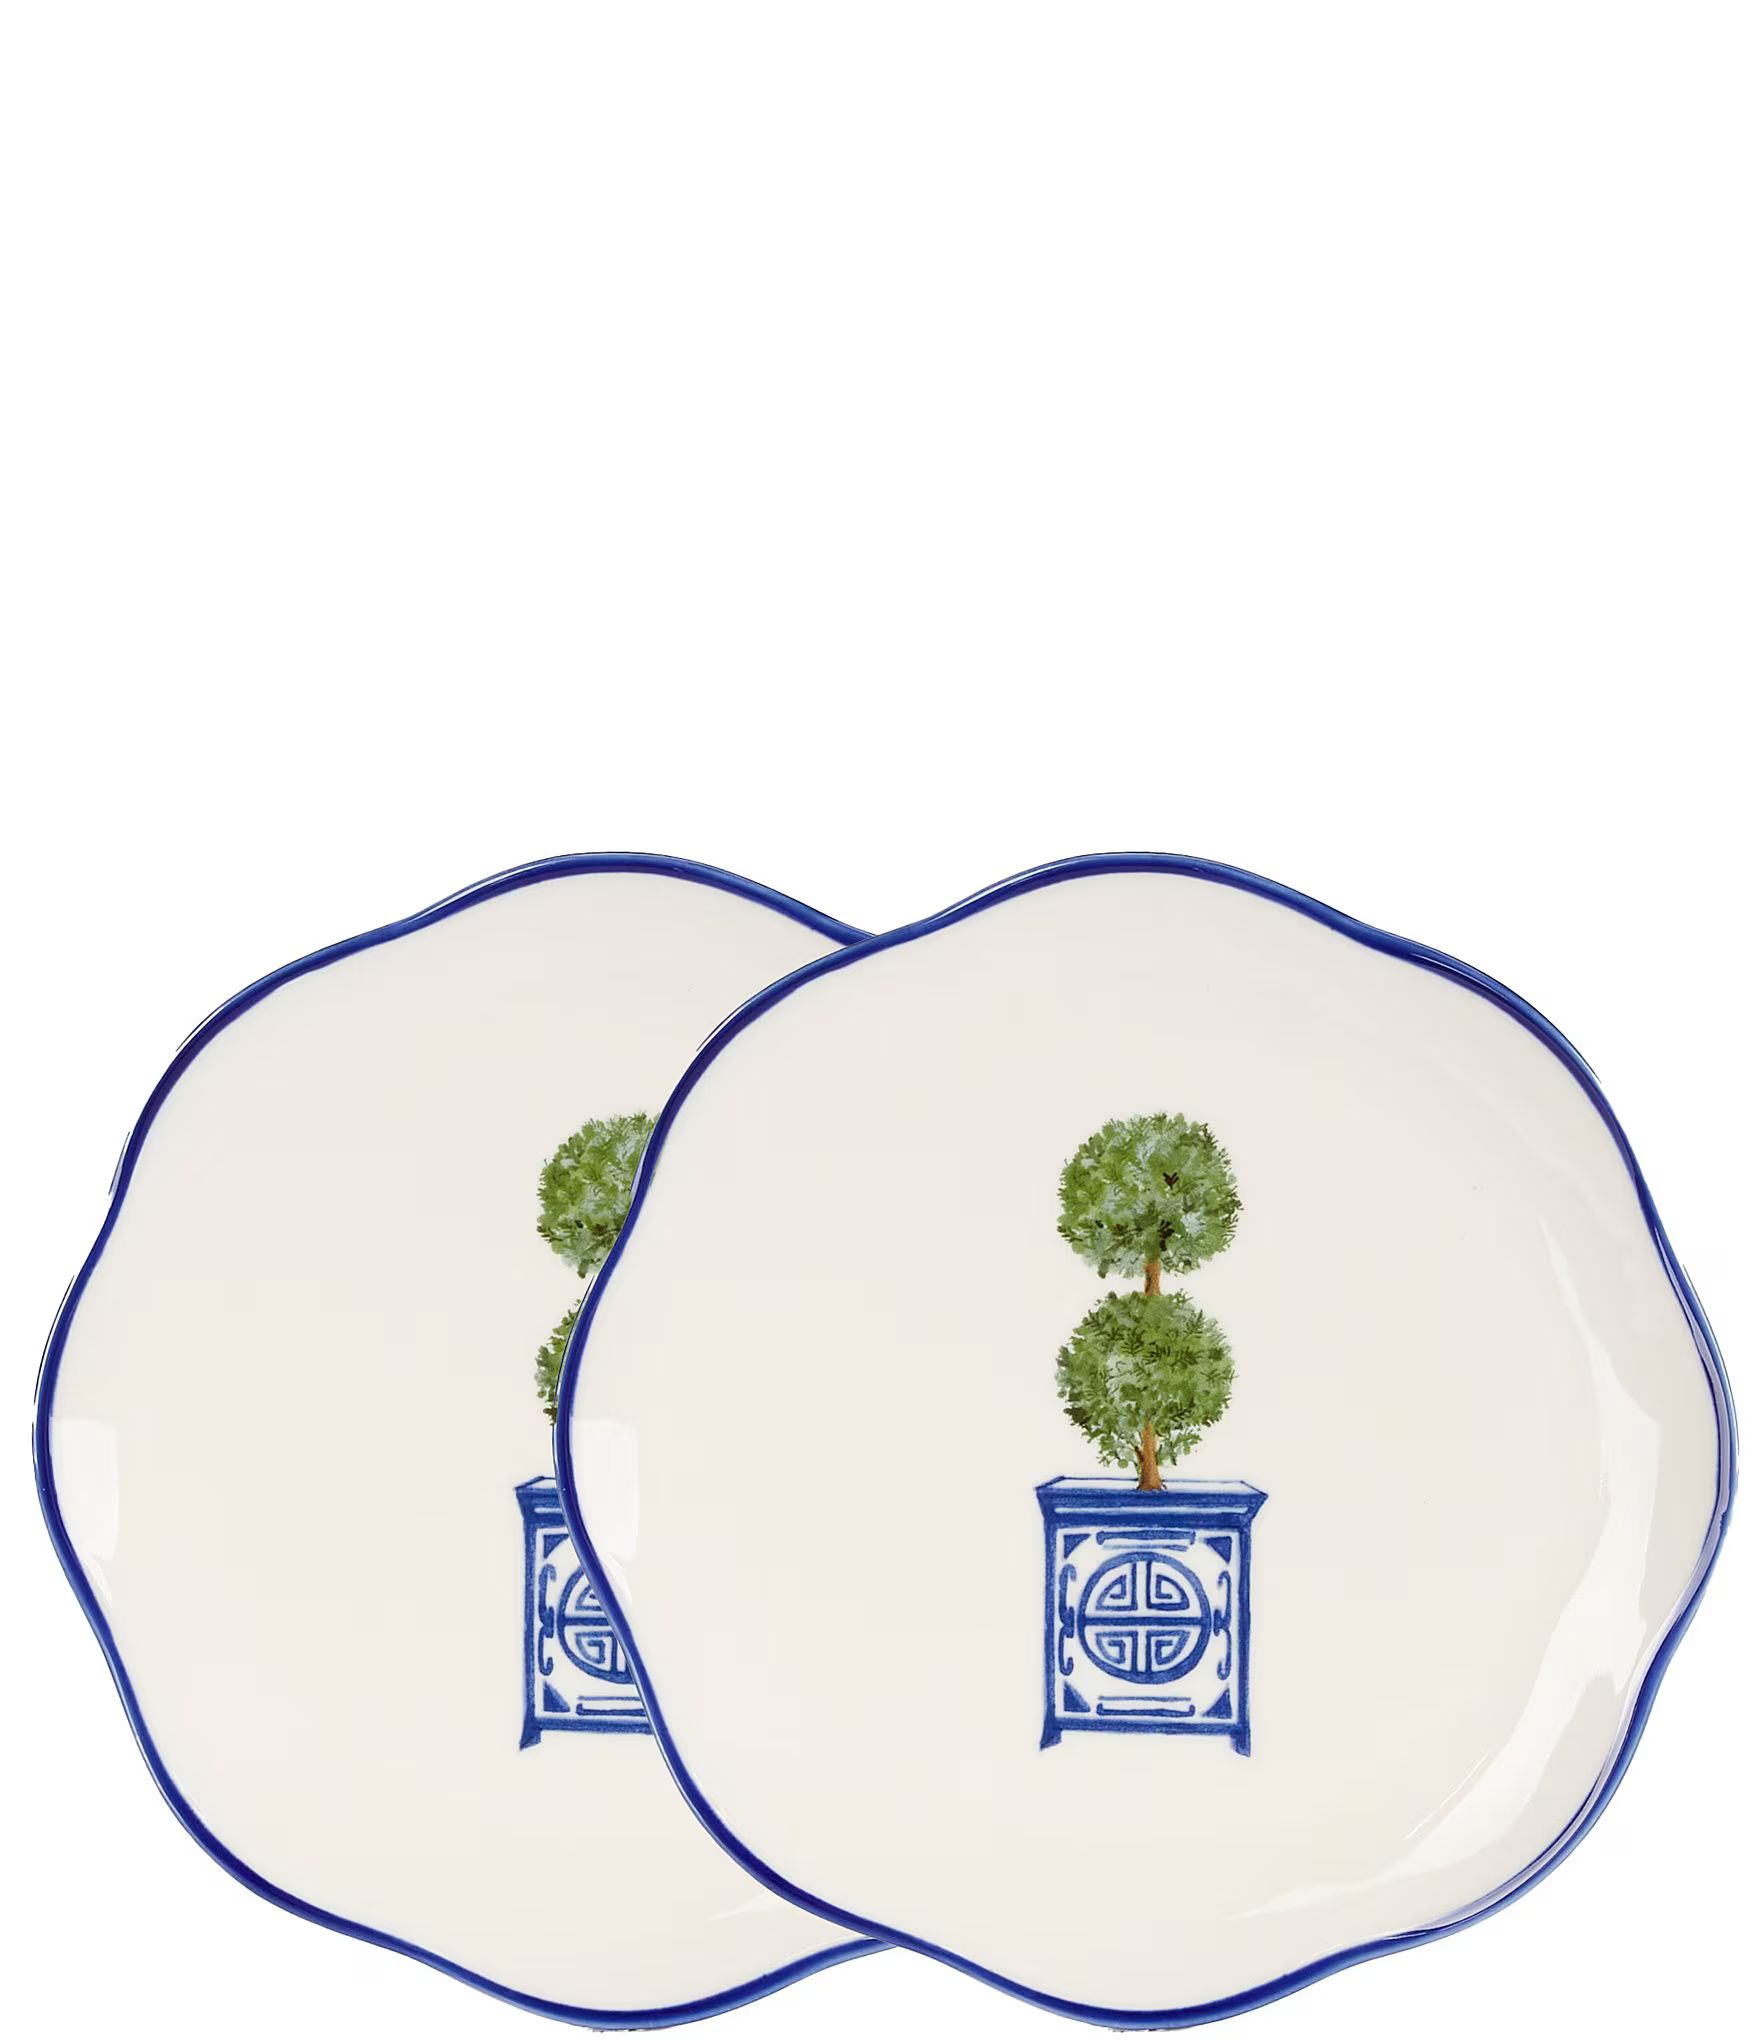 Southern LivingTopiary Accent Plates, Set of 2 | Dillard's